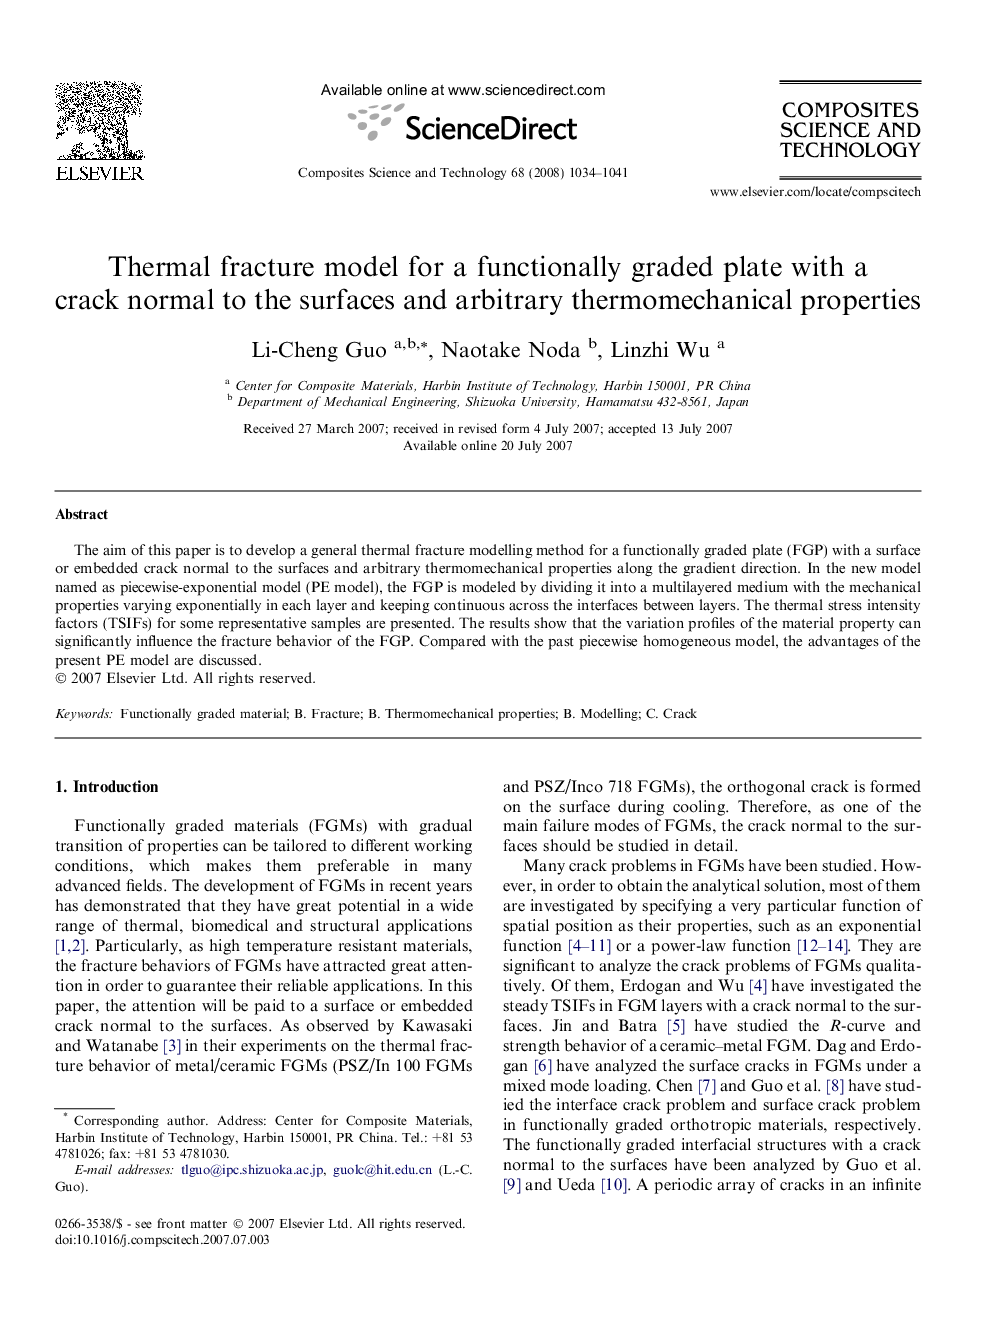 Thermal fracture model for a functionally graded plate with a crack normal to the surfaces and arbitrary thermomechanical properties